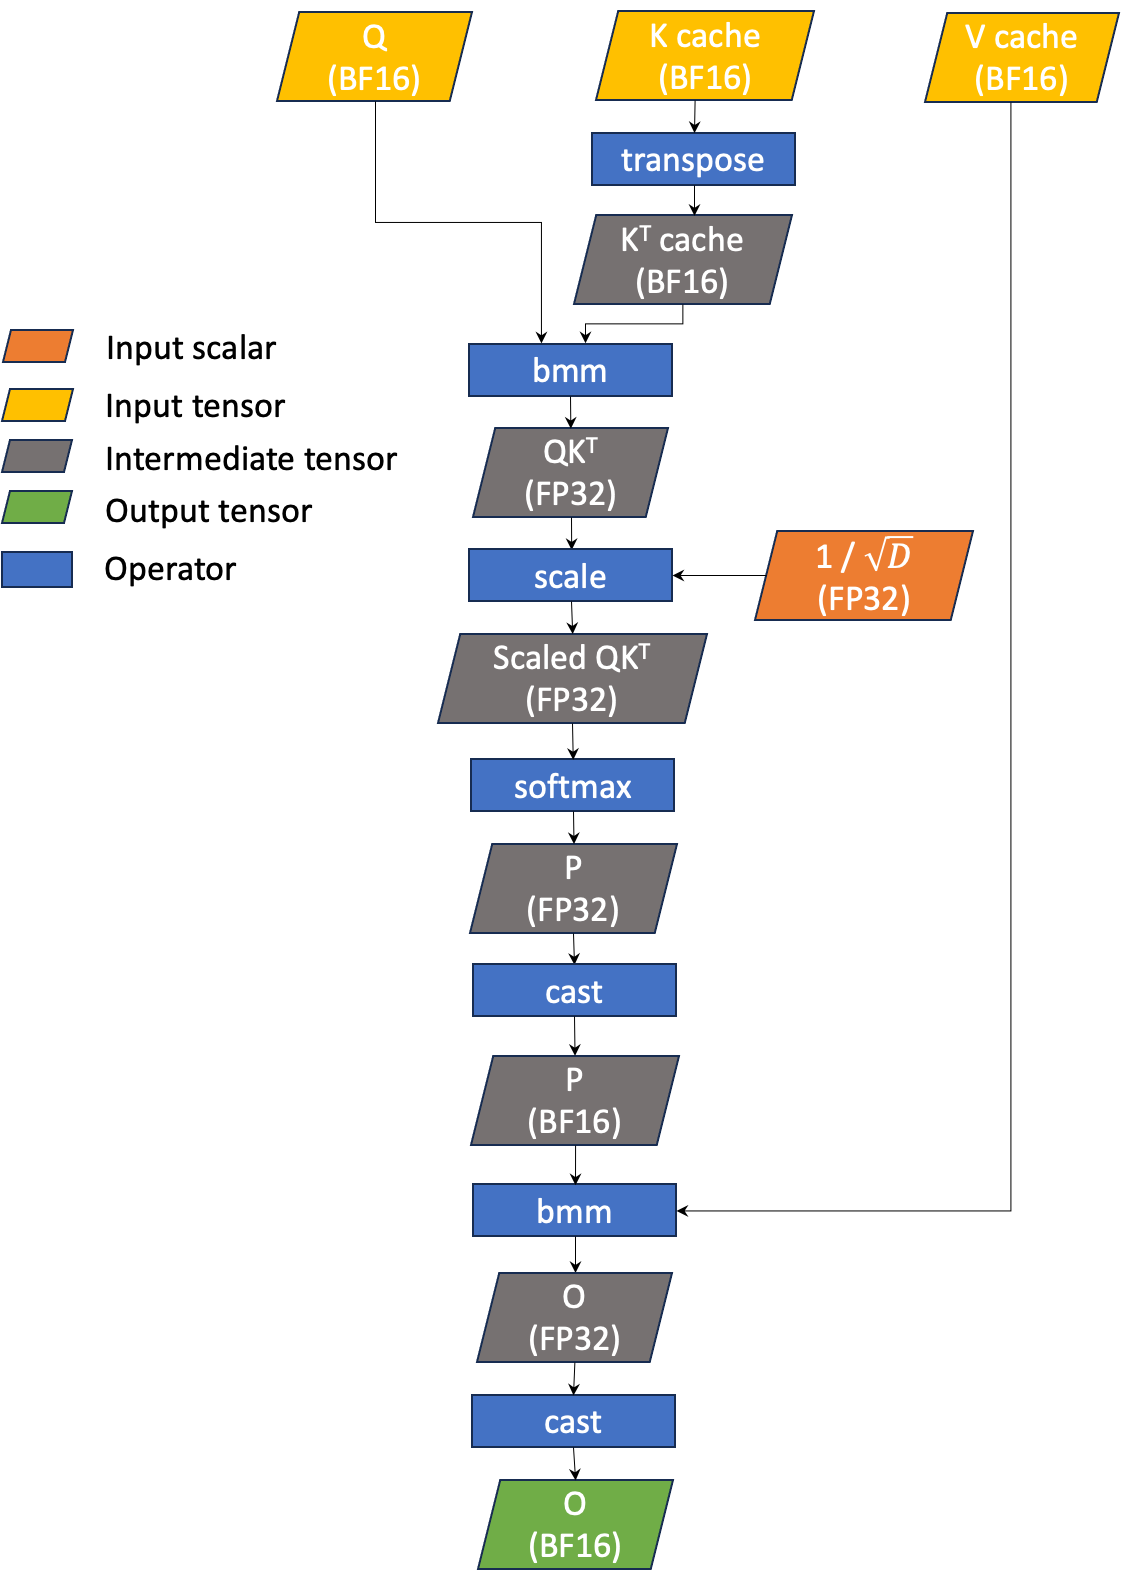 Figure 1: The simplified workflow of BF16 GQA for LLM inference